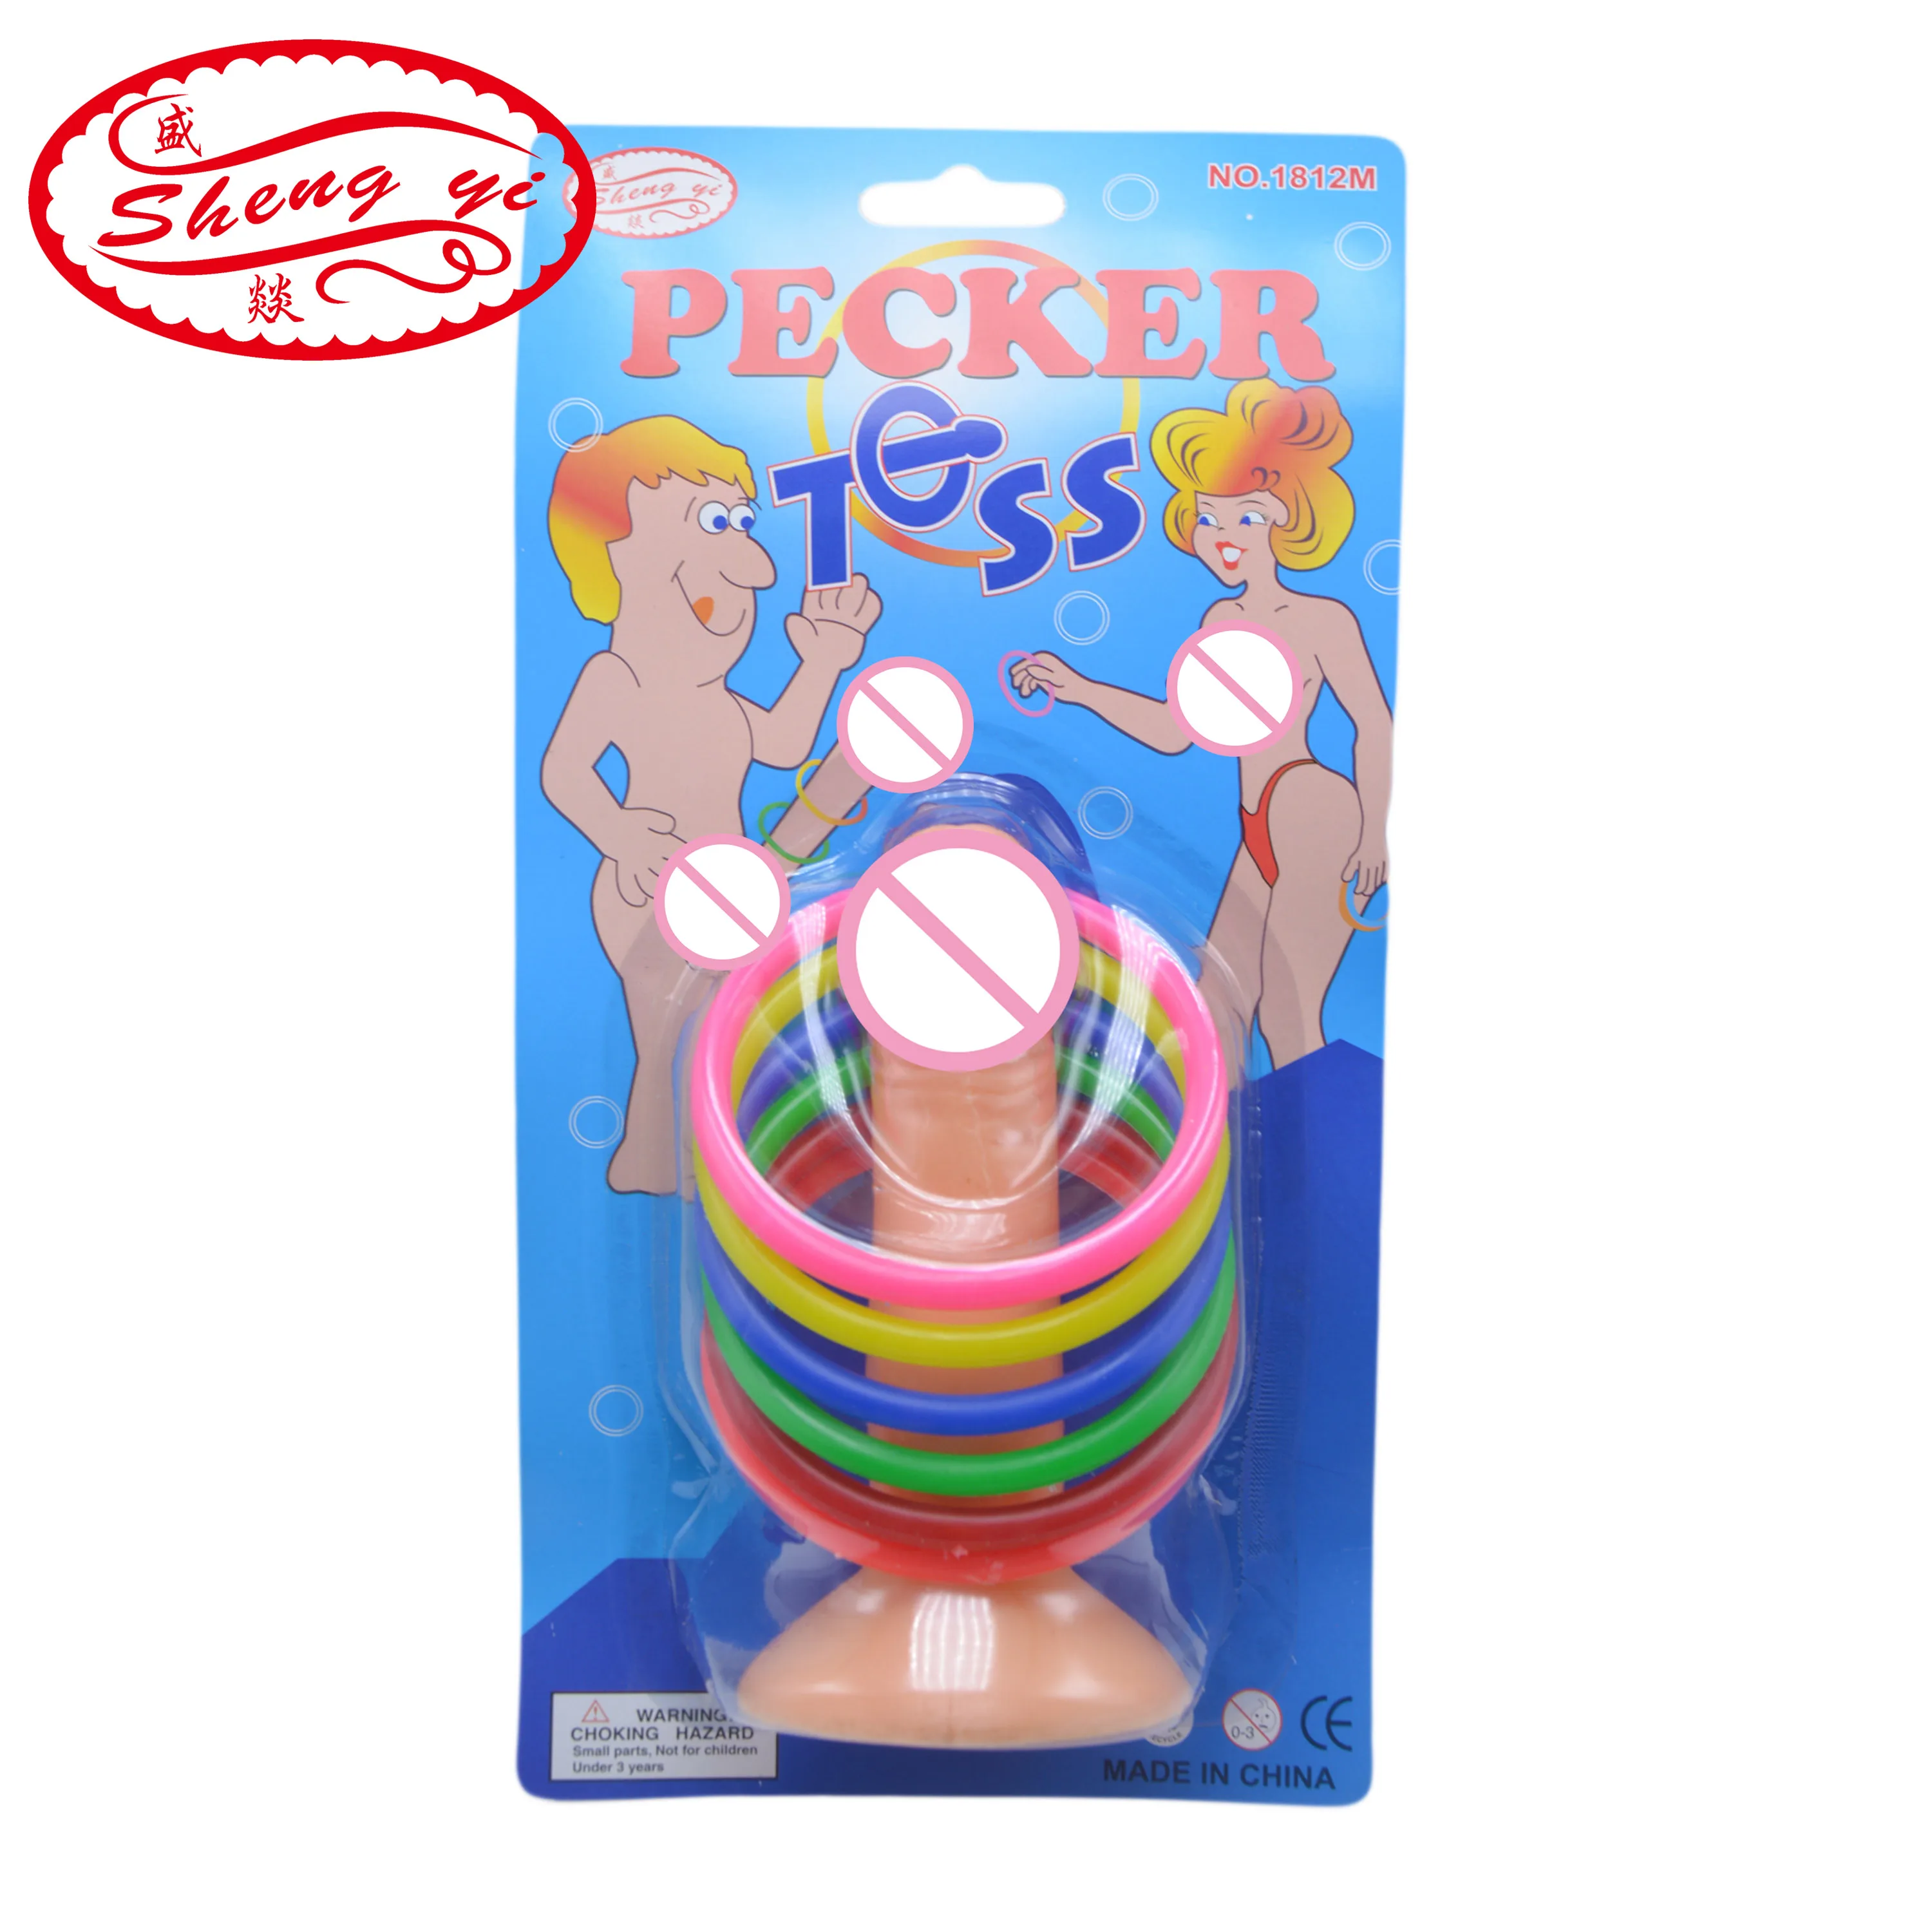 Dick Heads Fun Game Ring Toss Willy Hoopla Game Hen Night Party Bride To Be Game 